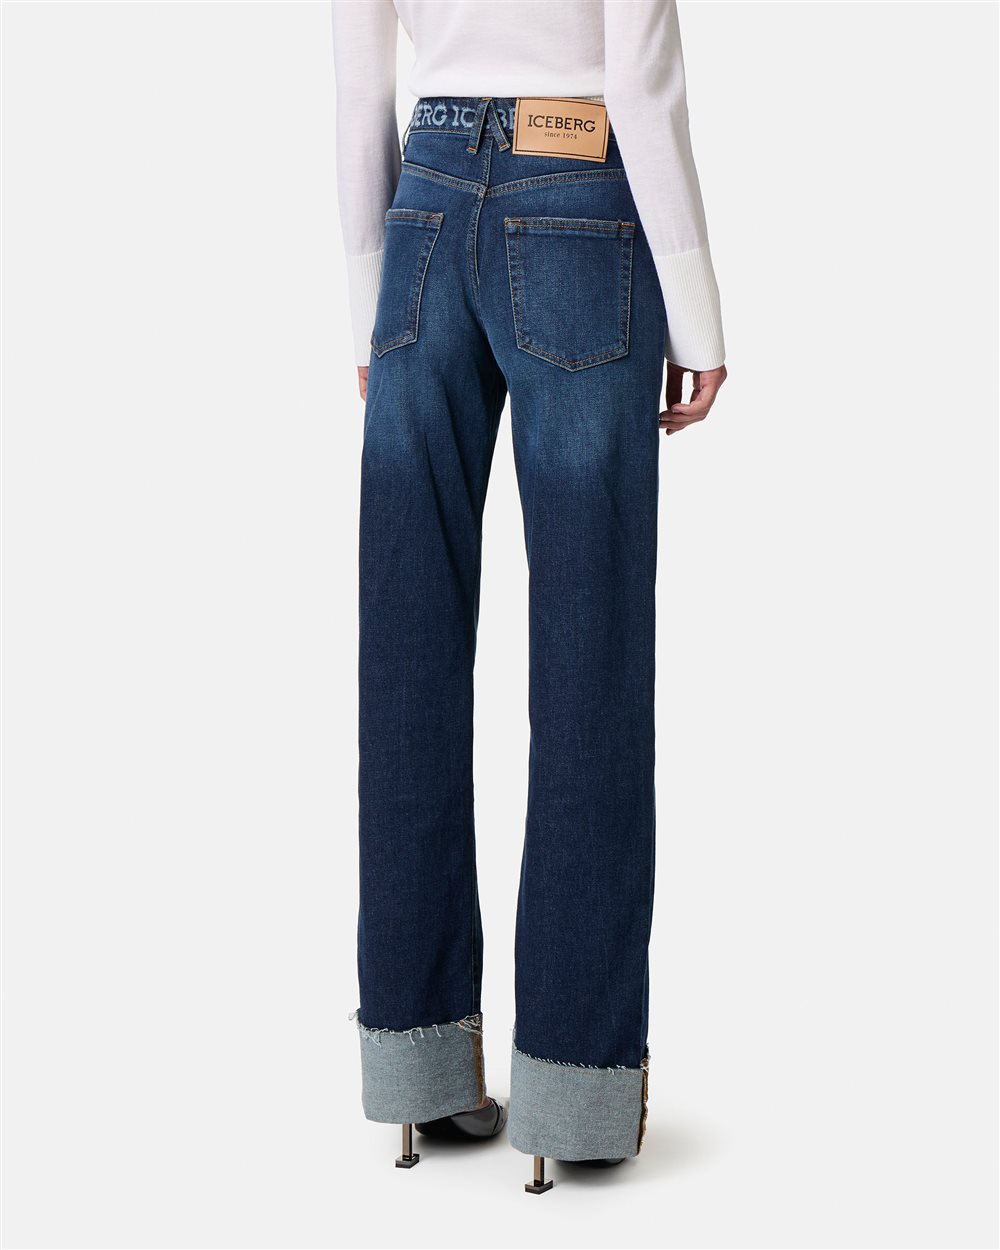 Wide jeans with logo - Iceberg - Official Website